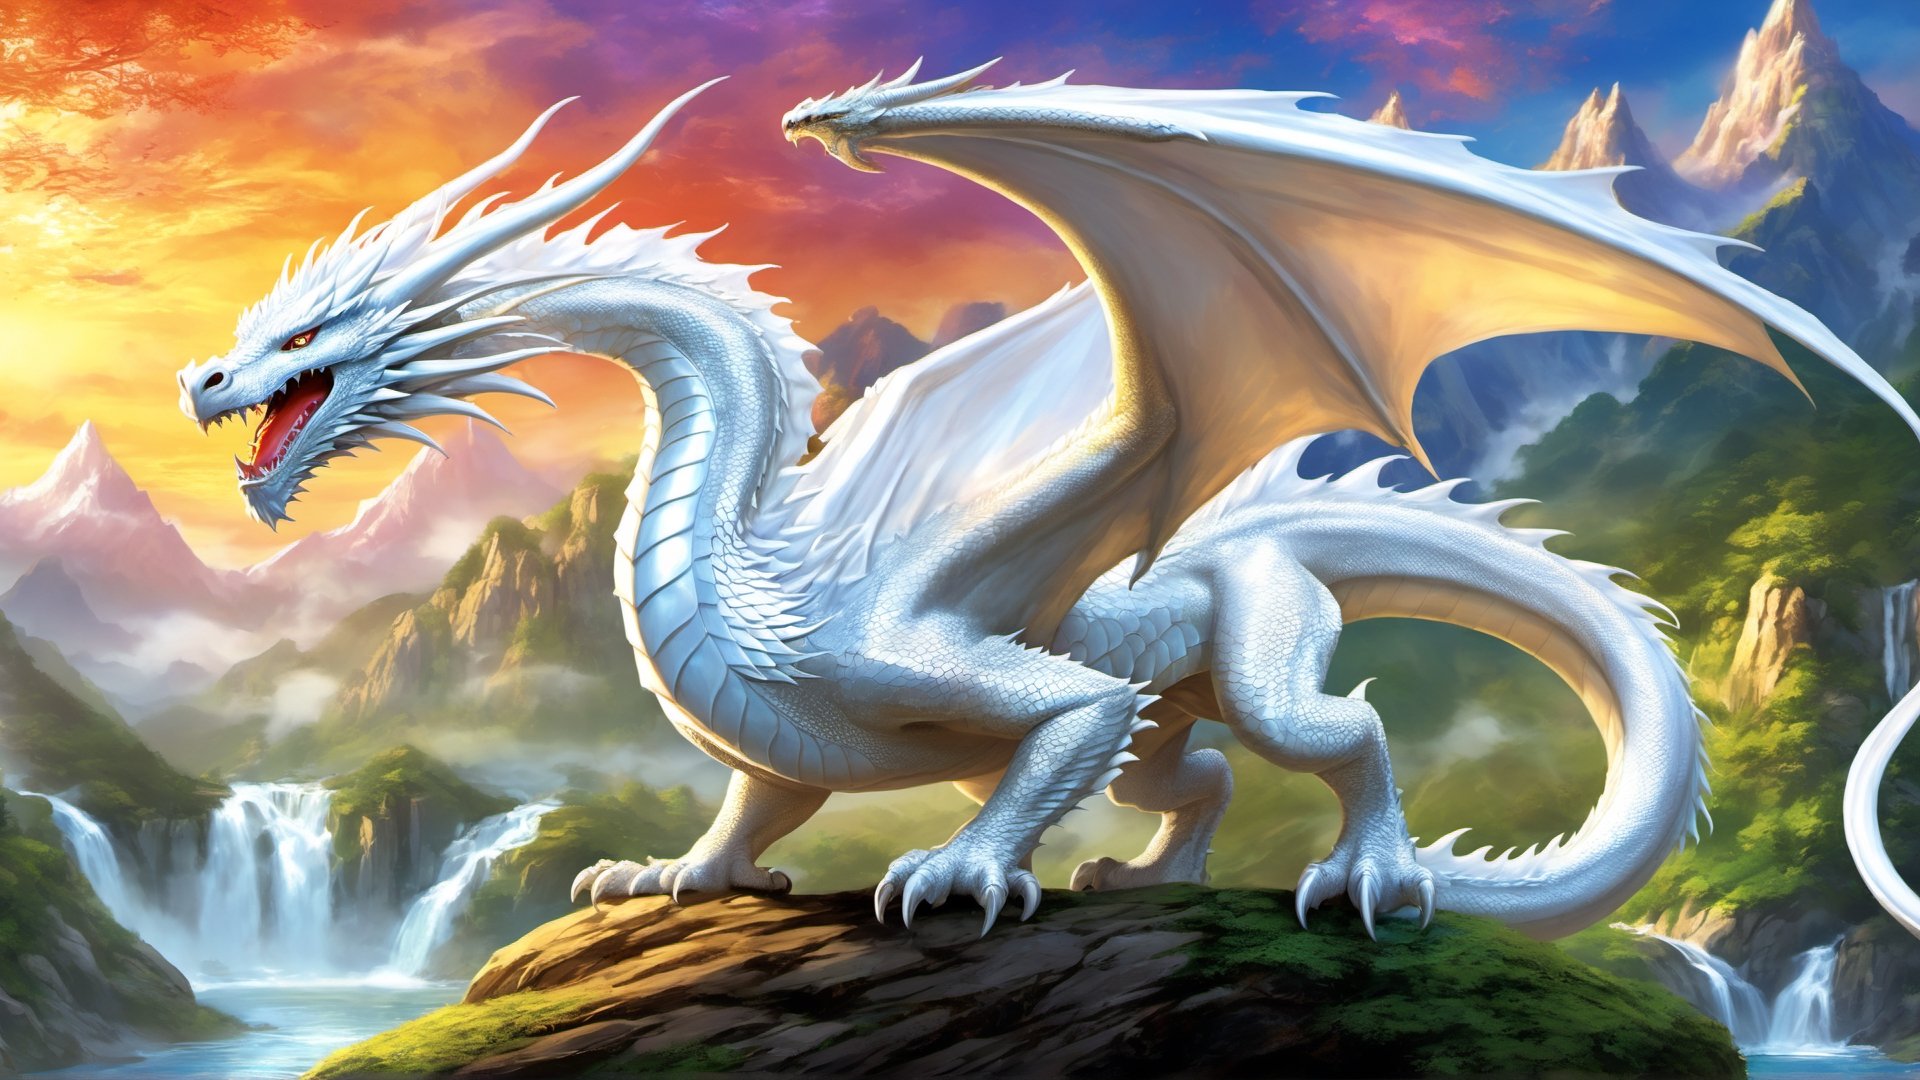 Imagine a spellbinding fantasy scene featuring a majestic magical creature—a white dragon with scale skin, an open mouth revealing sharp teeth and claws, and a powerful tail. Request meticulous attention to detail, vibrant colors, and a 32k high-quality image that brings this mythical dragon to life in a super-real and visually stunning manner. Specify a fantastical world-style background that enhances the dragon's presence, creating a masterpiece that captures the awe and wonder of a magical realm